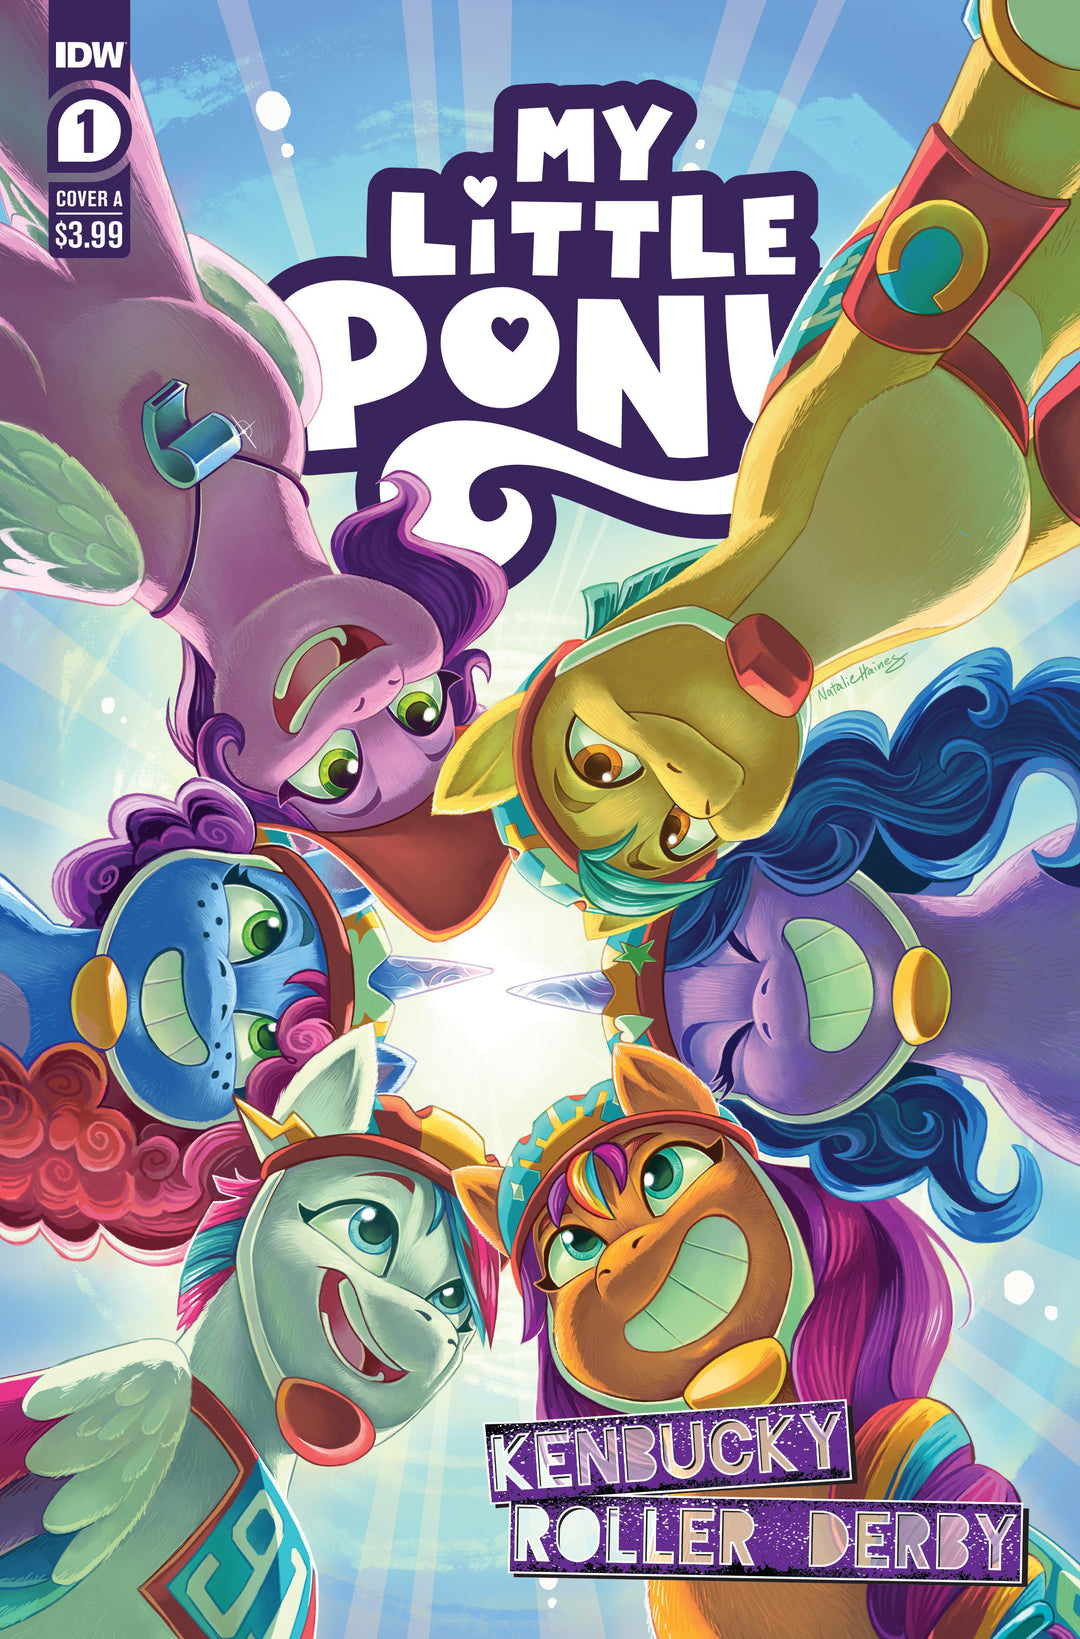 My Little Pony Kenbucky Roller Derby #1 Cover A (Haines)